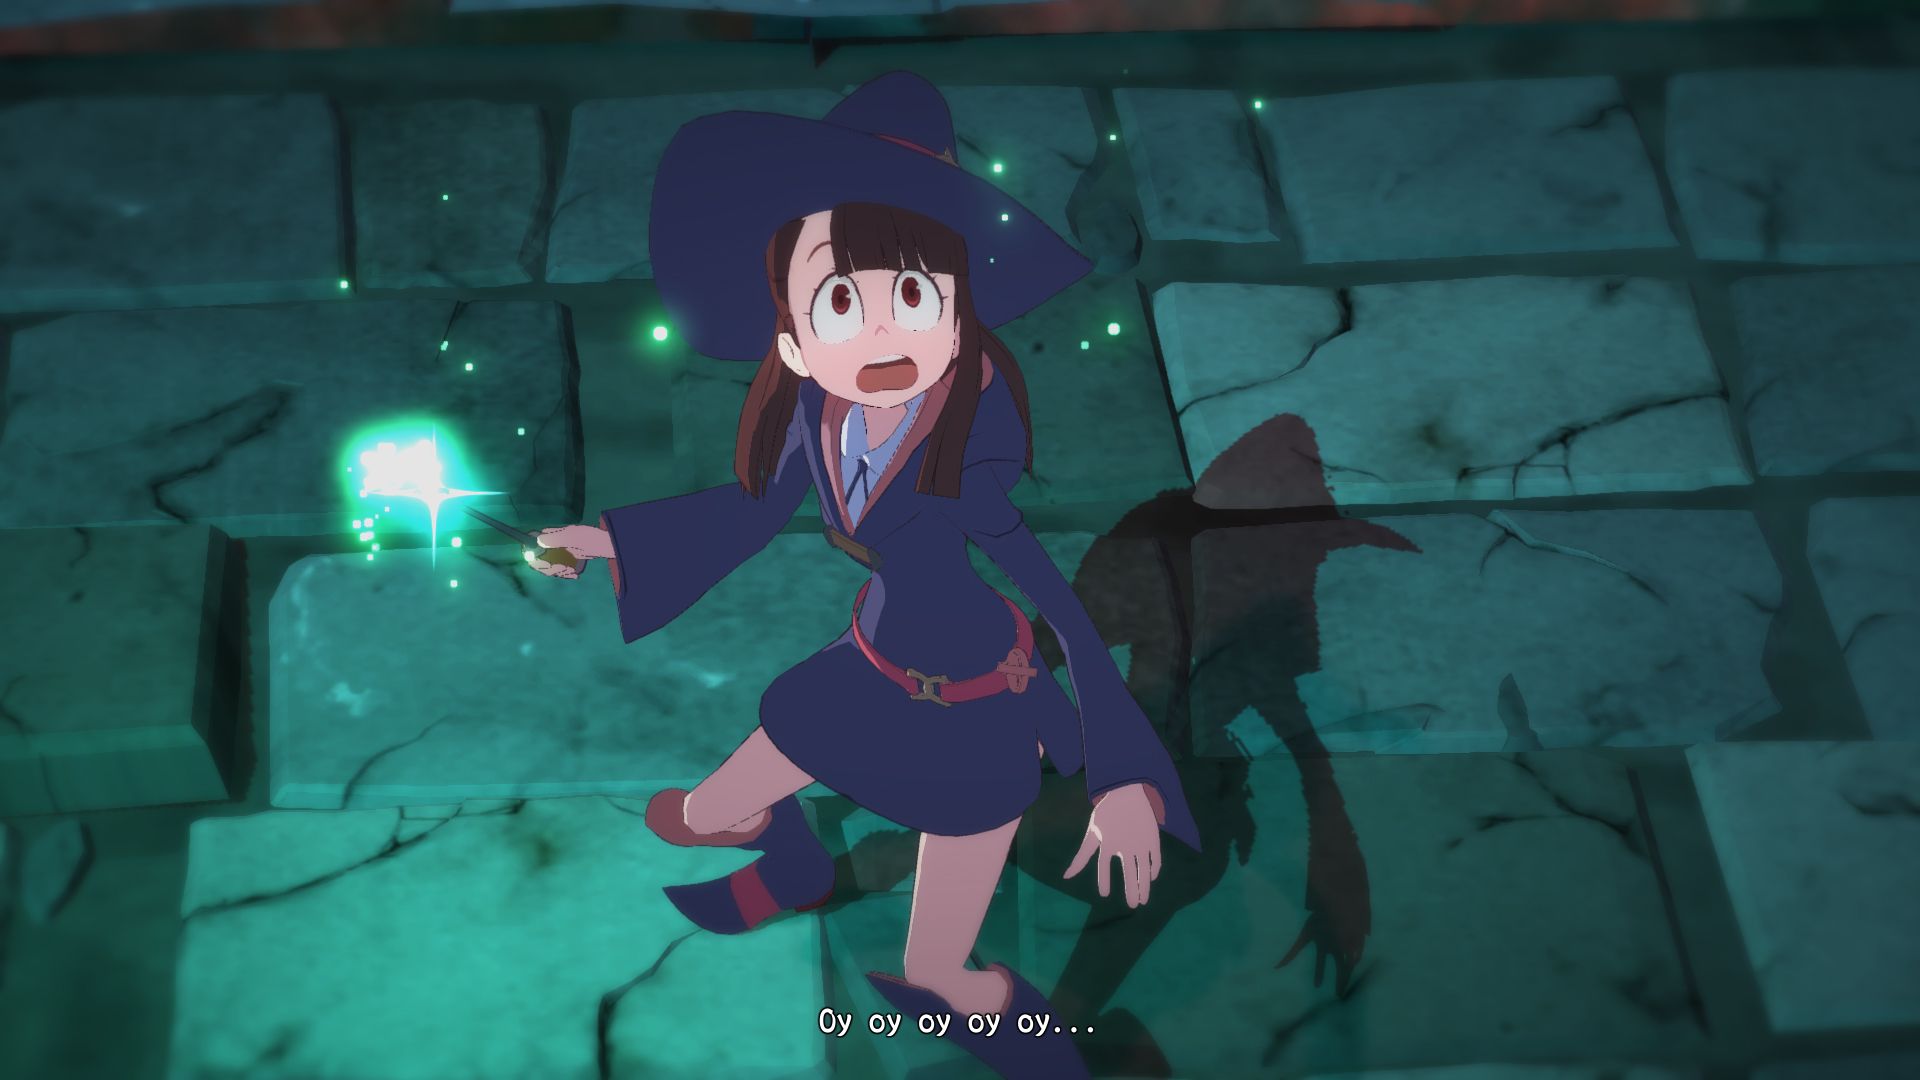 Preview: 'Little Witch Academia' casts spell on PS PC